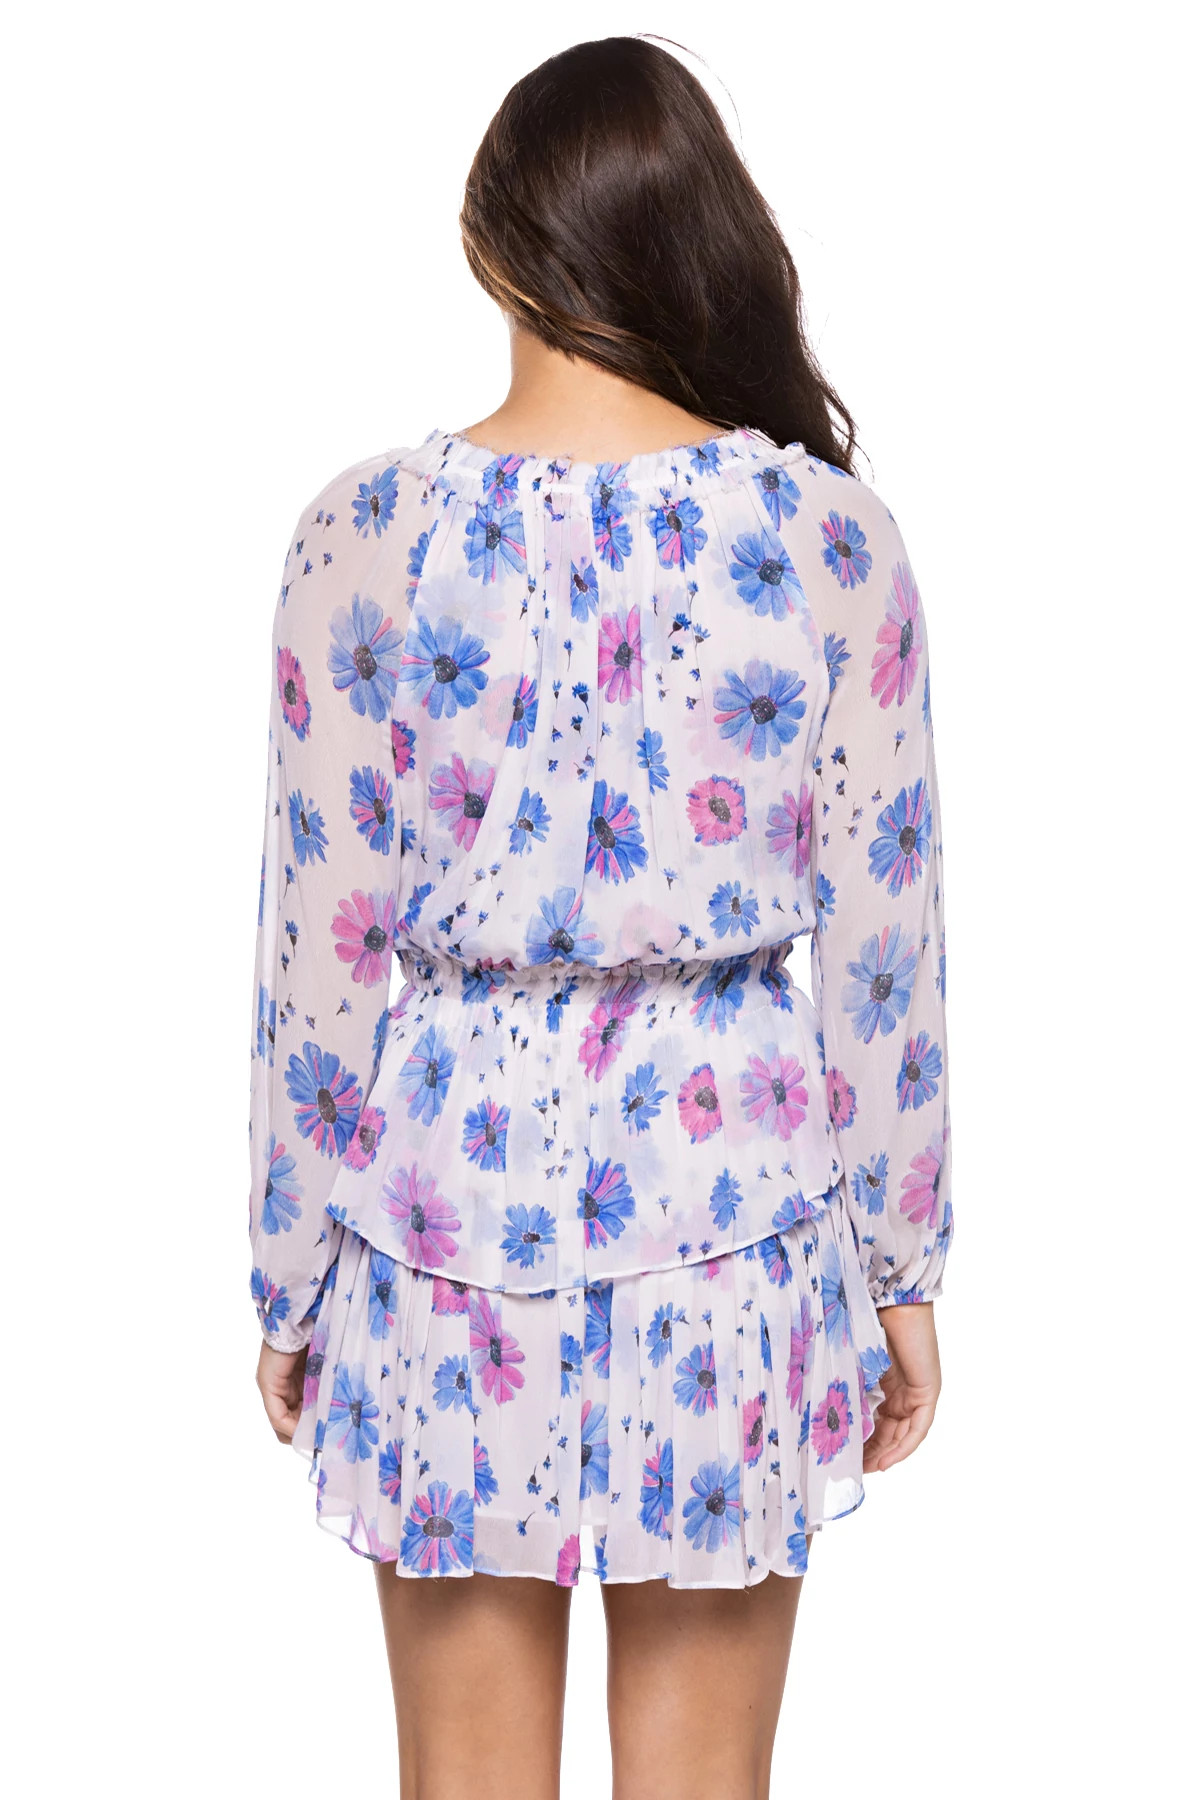 DEEP COTTON CANDY Popover Long Sleeve Dress image number 2